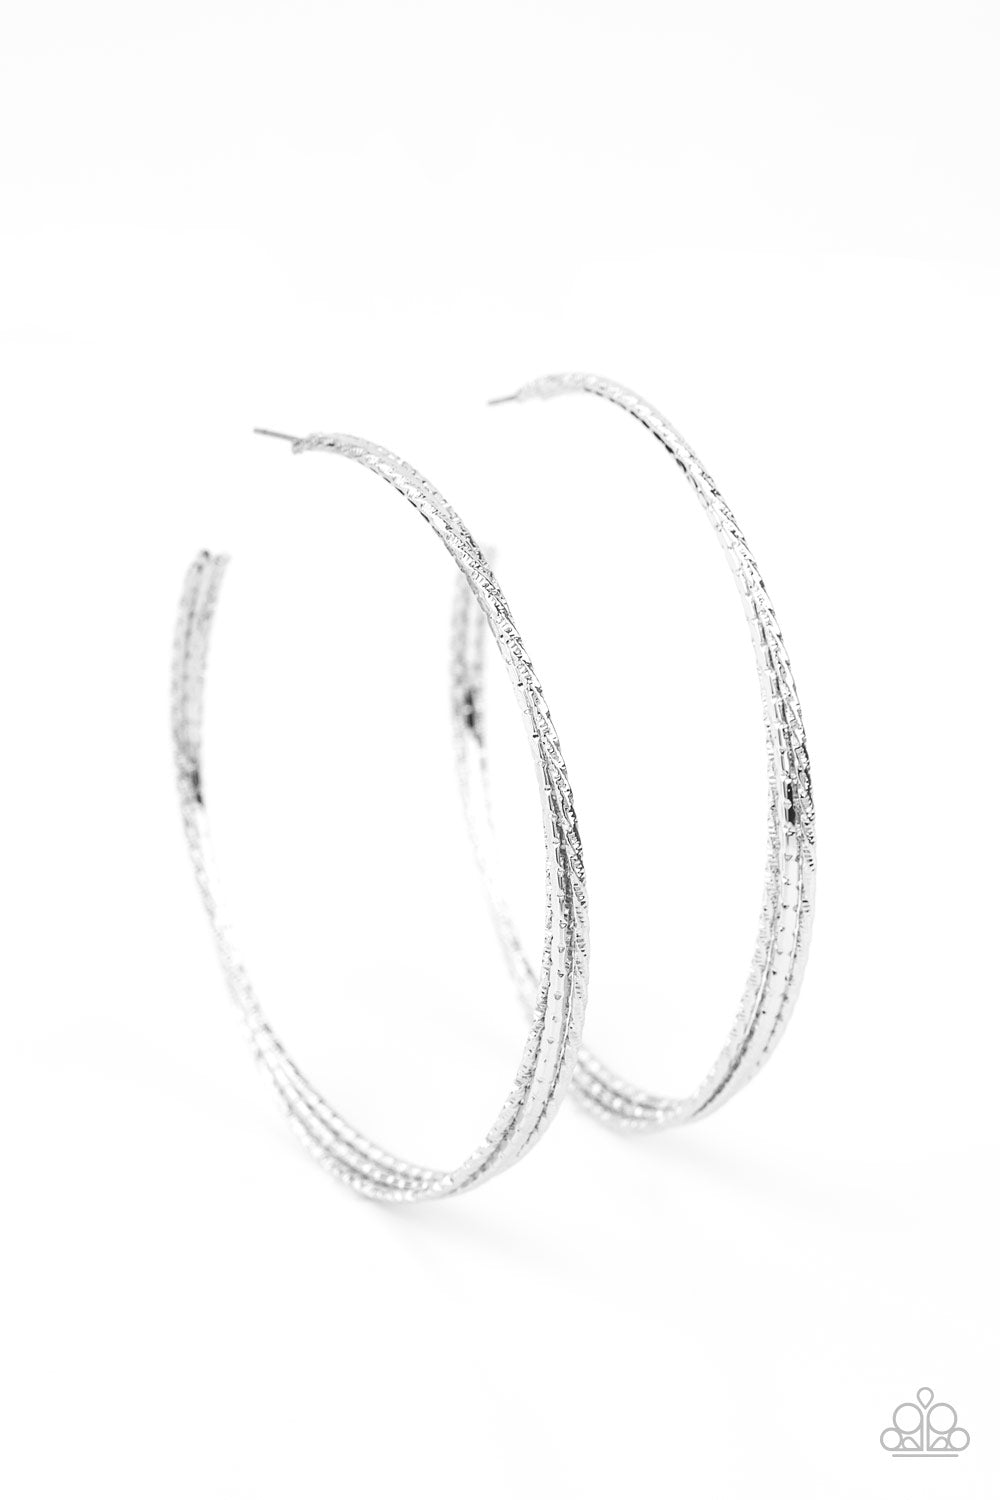 New Paparazzi Silver Hoops - Varying in hammered and diamond-cut textures, three glistening silver bars dramatically curl into an oversized hoop for a glamorous finish. 3" 1/4 size